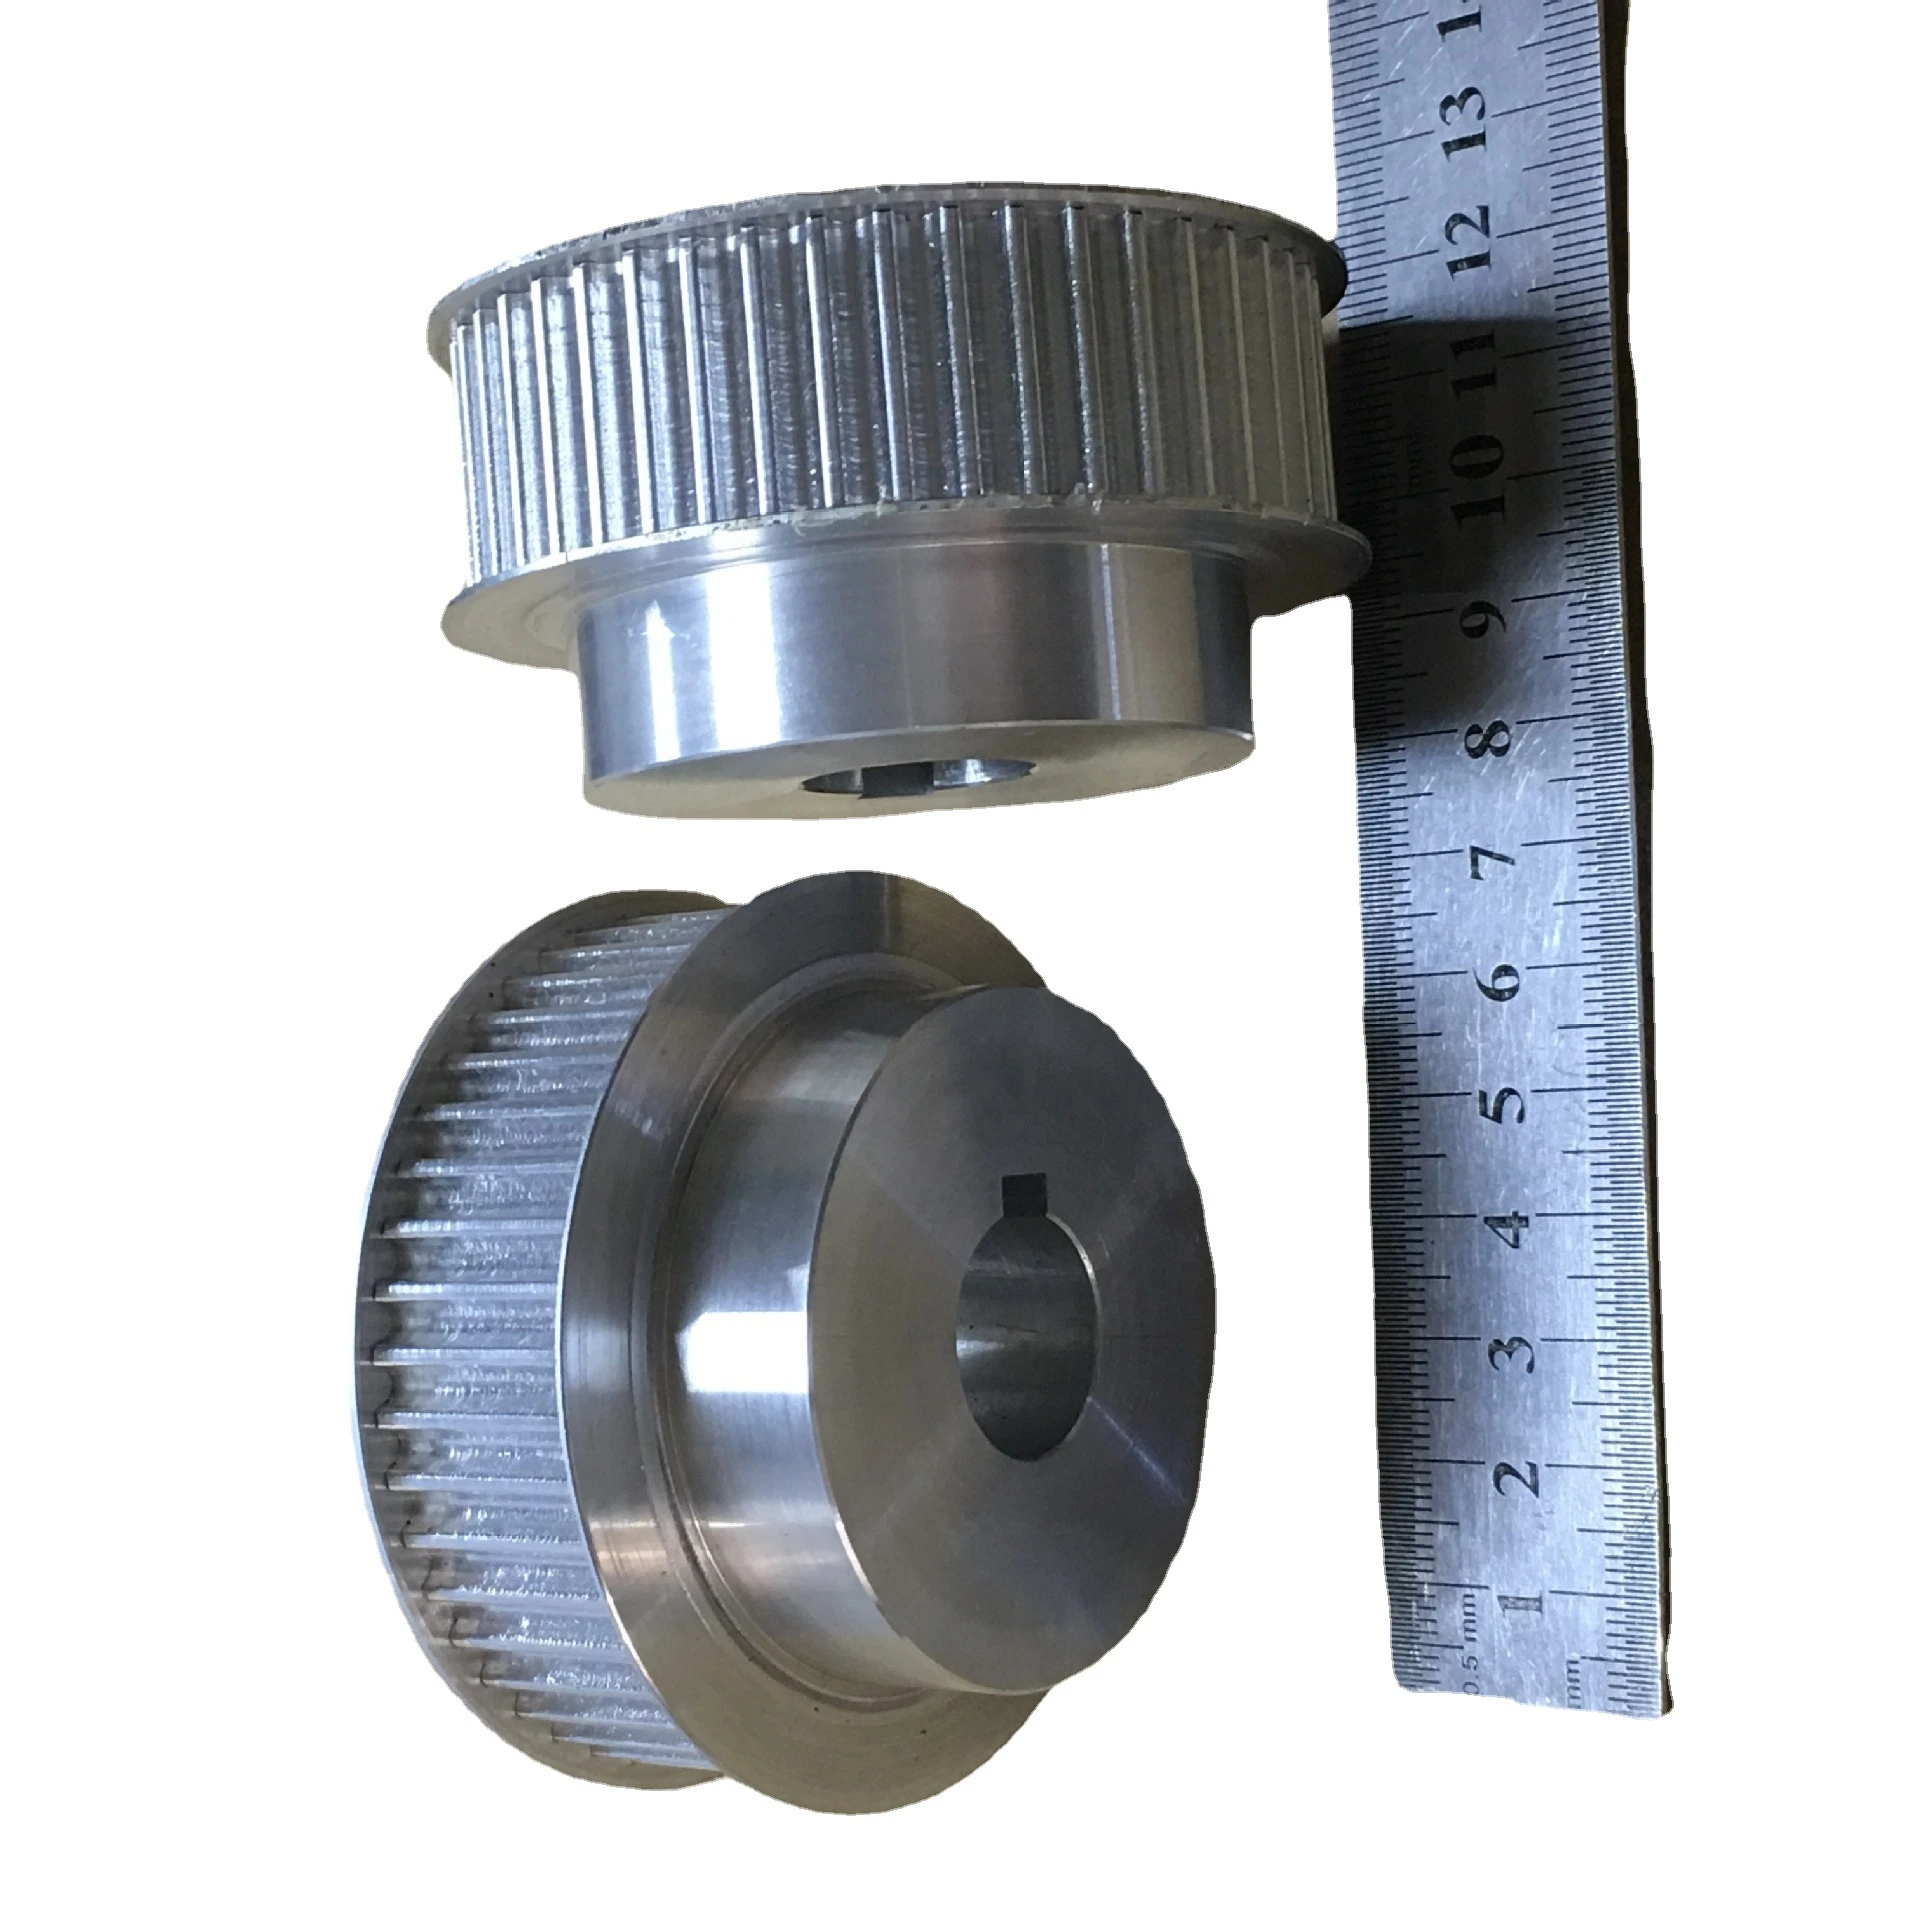 Transmission Pulley, Synchronous Pulley, Round Threaded Shaft Synchronous Pulley Driving Pulley